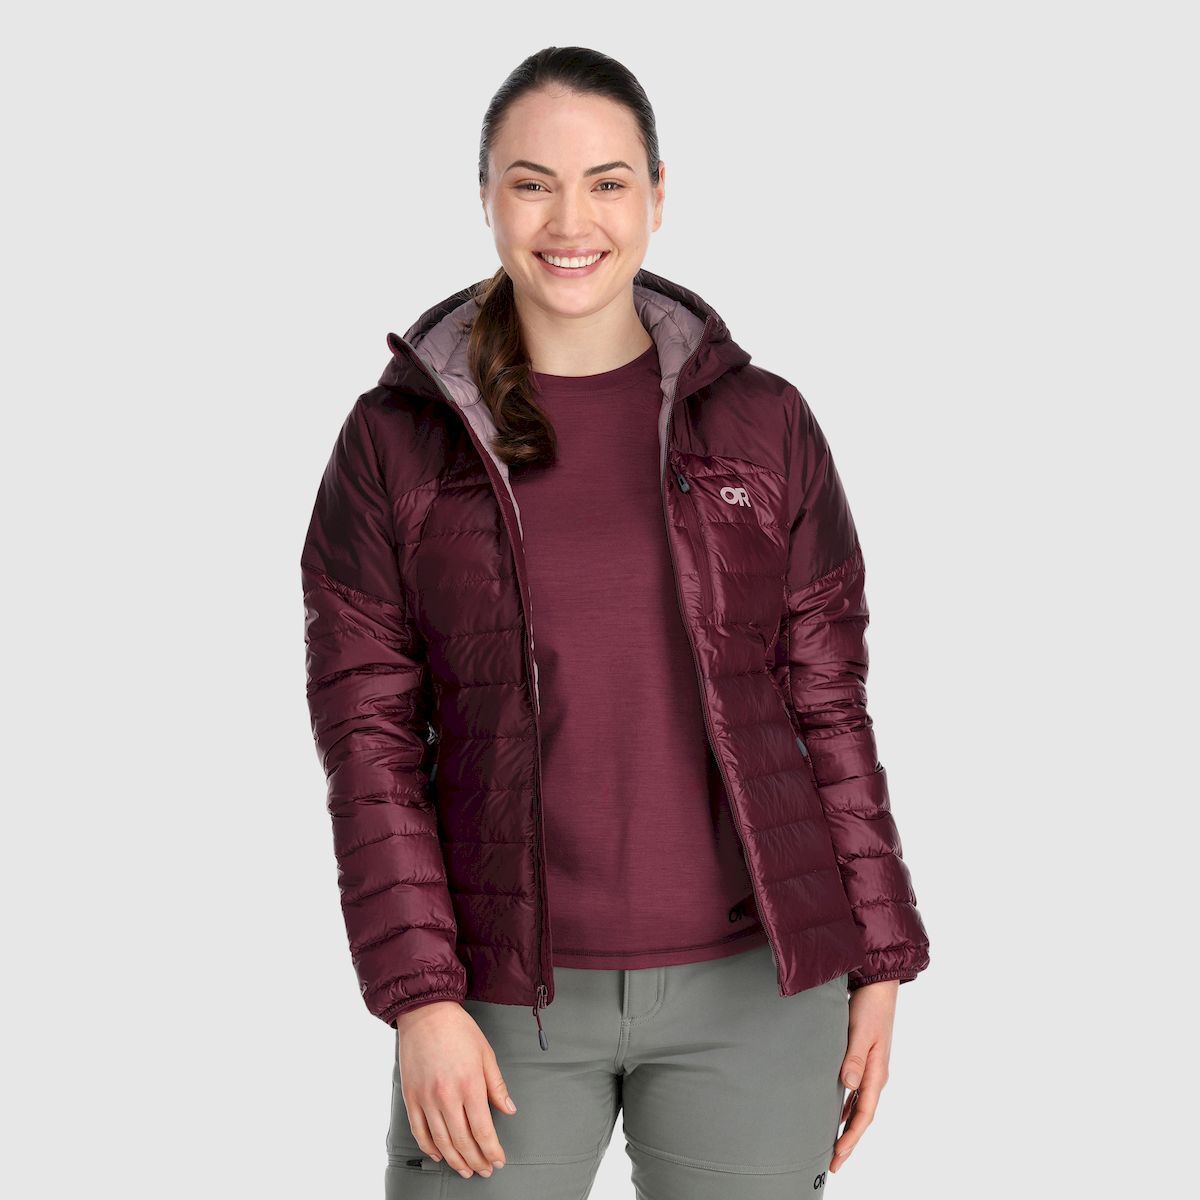 Outdoor Research Helium Down Hooded Jacket - Down jacket - Women's